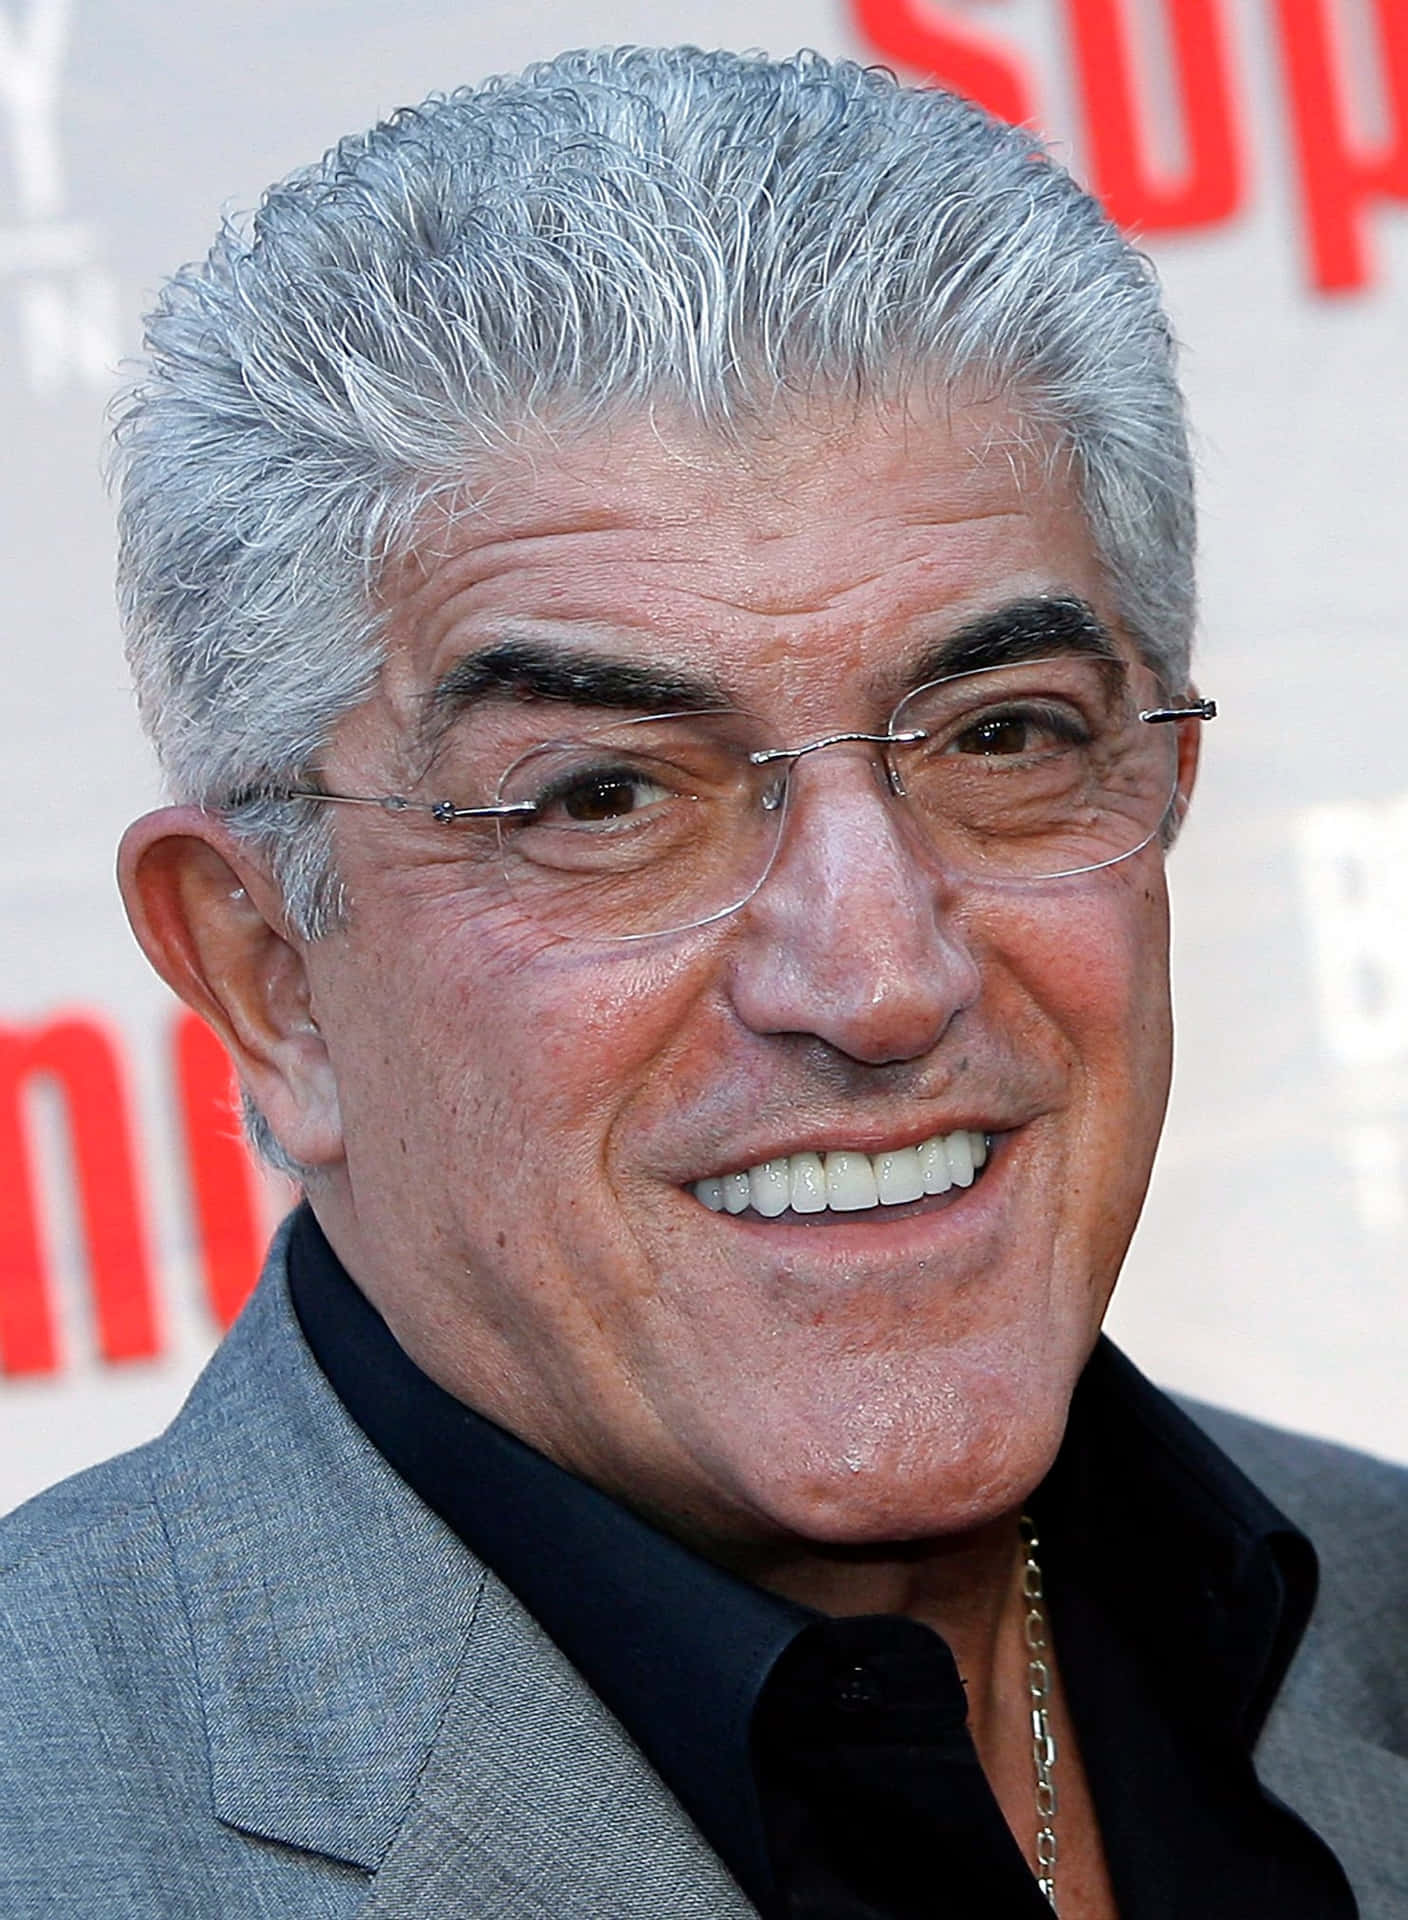 Frankvincent Was An American Actor, Musician, And Author. He Was Best Known For His Role As Phil Leotardo In The Tv Series The Sopranos. Vincent Was Born On August 4, 1939, In North Adams, Massachusetts, And Passed Away On September 13, 2017. He Had A Successful Career In Both Film And Television, Appearing In Movies Such As Goodfellas, Casino, And Raging Bull. Vincent Was Also A Respected Jazz Musician And Released Two Albums As A Singer. He Wrote An Autobiography, A Guy's Guide To Being A Man's Man, Which Was Published In 2006. Fondo de pantalla